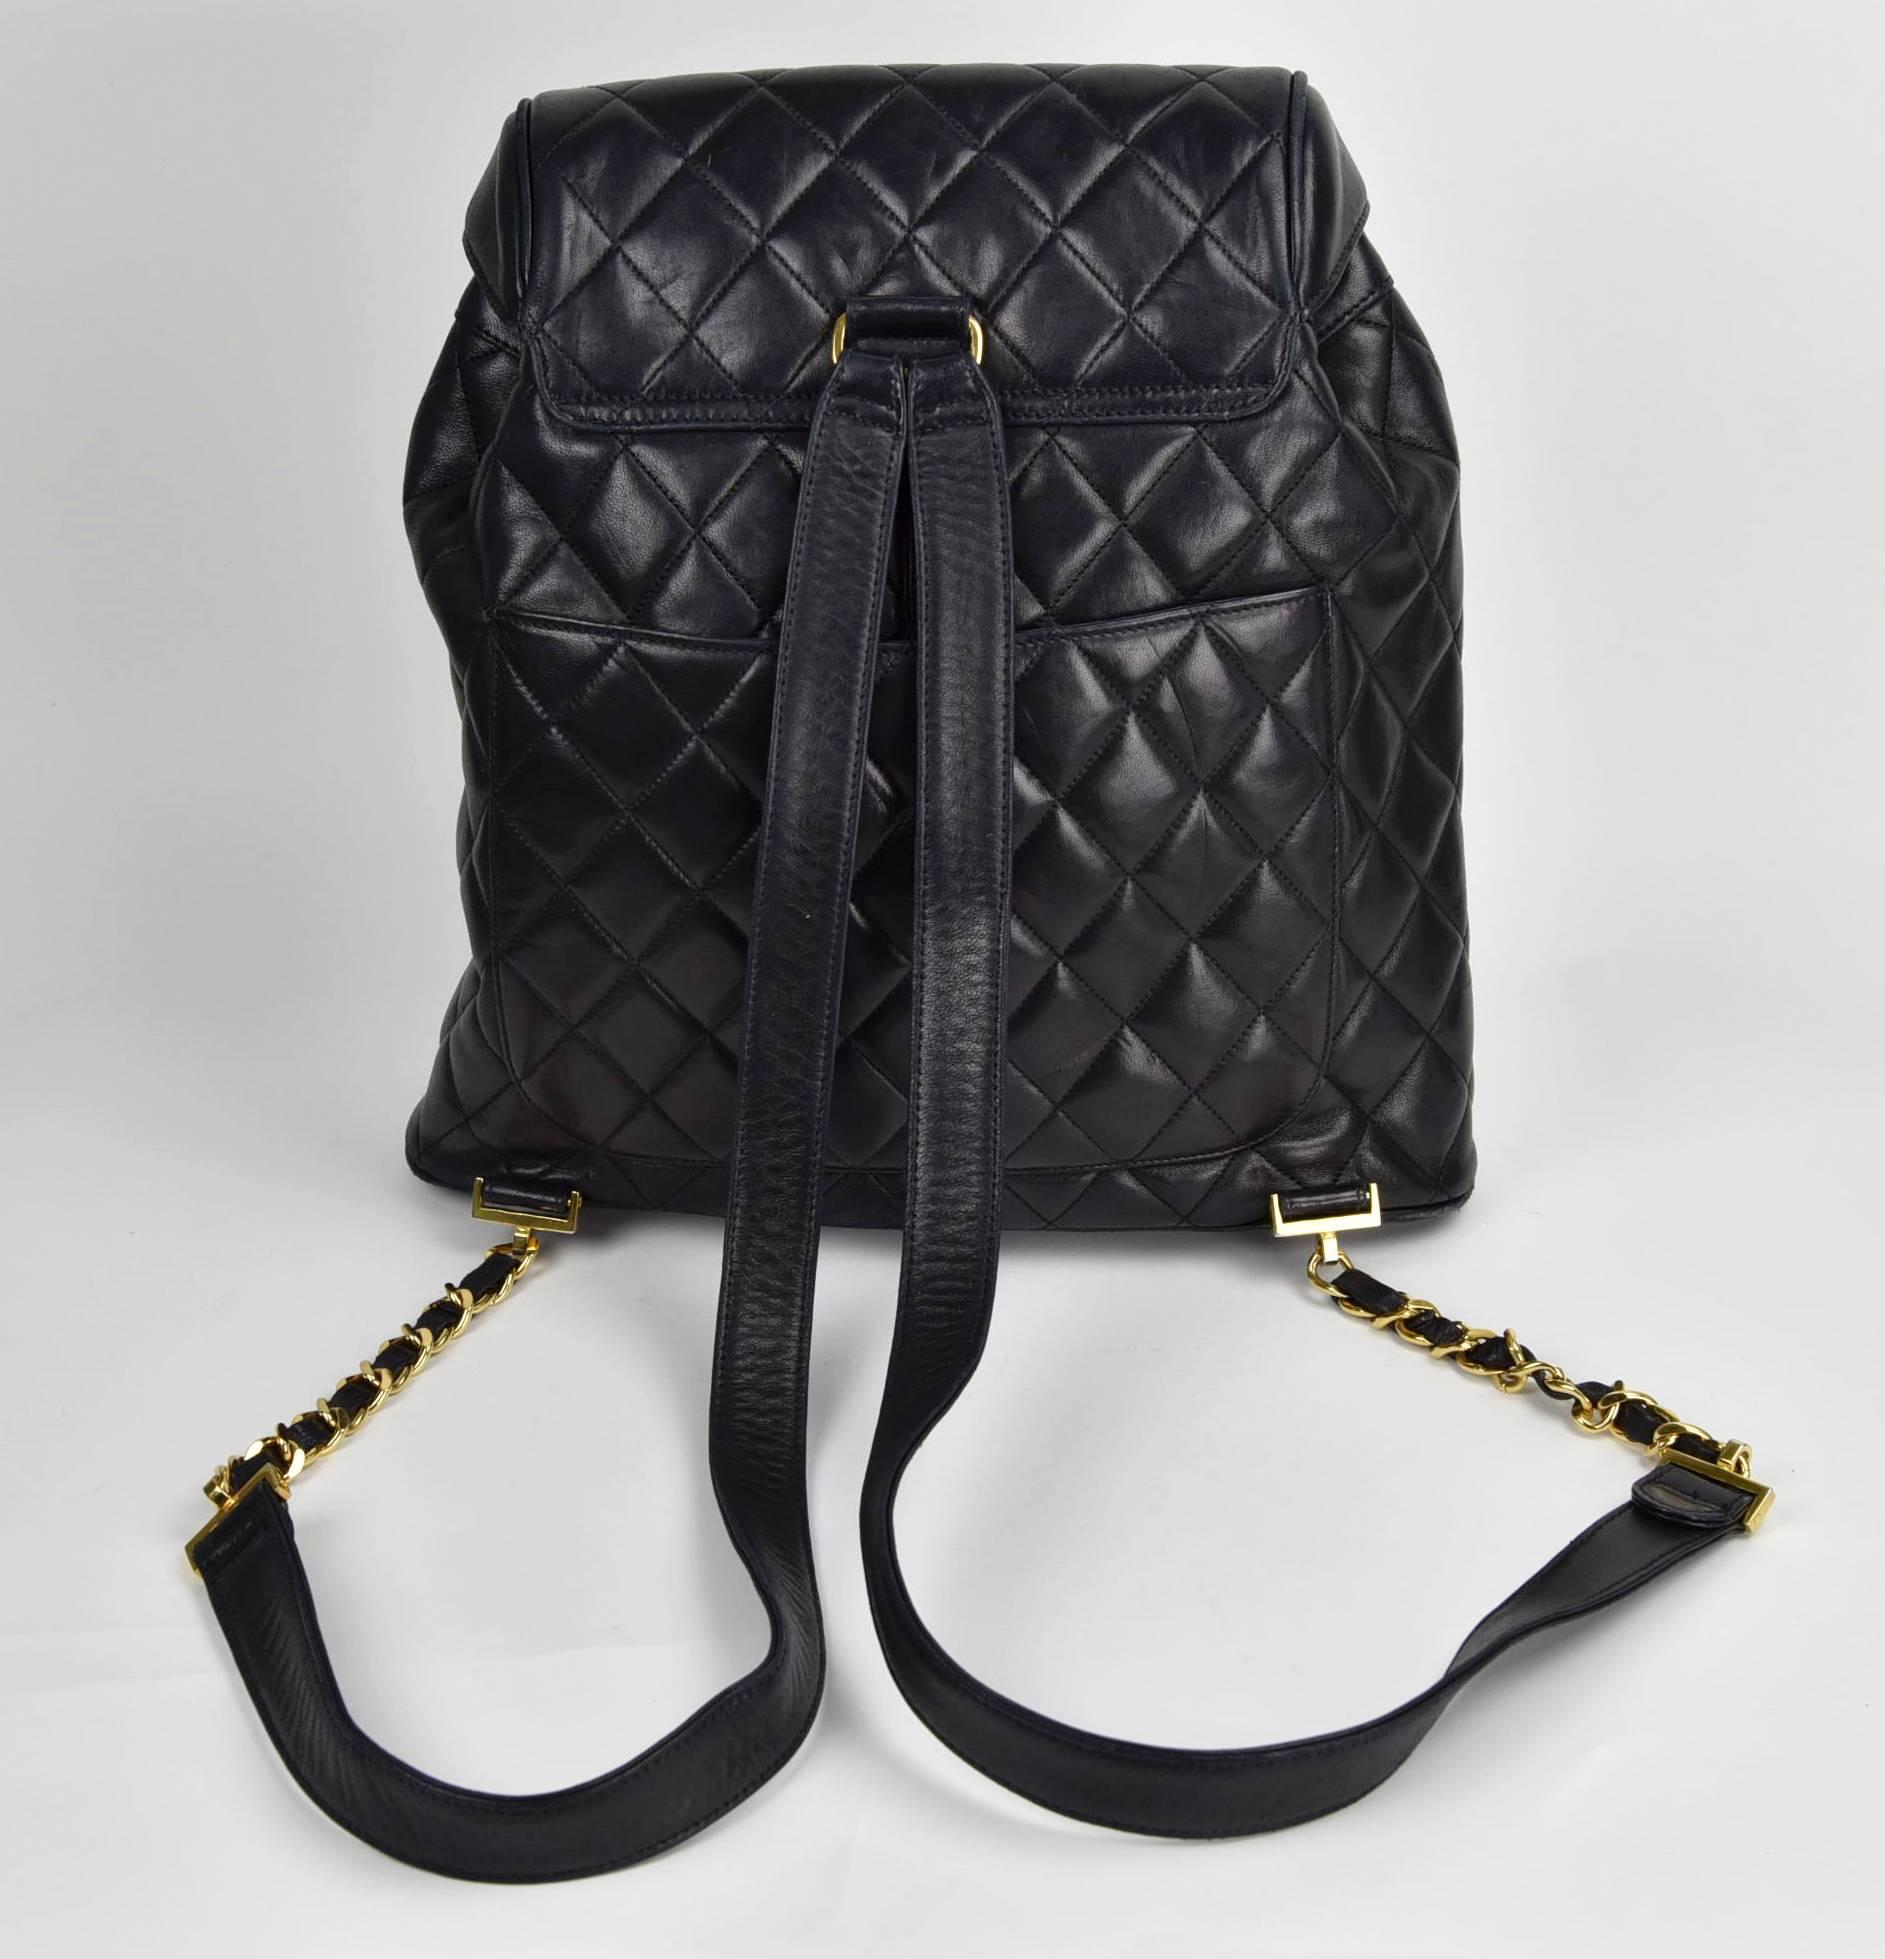 A fabulous Chanel backpack in beautiful condition.  Quilted black lambskin leather with gold large CC turncock closure in front. Signature woven chain and leather shoulder straps.  This is a classic Chanel piece with the high quality 1990s leather